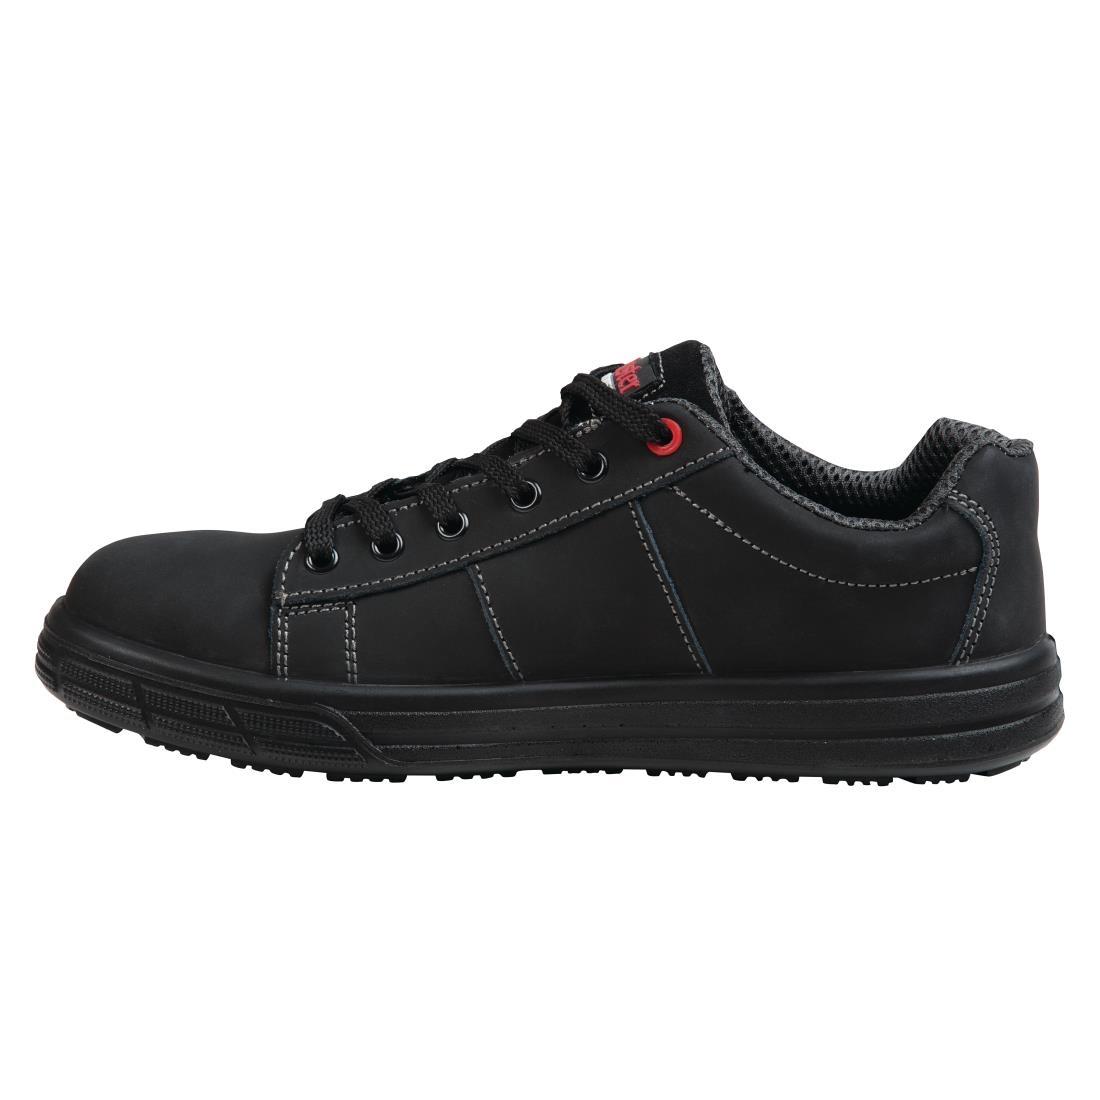 Slipbuster Safety Trainers Black 38 - BB420-38  - 6